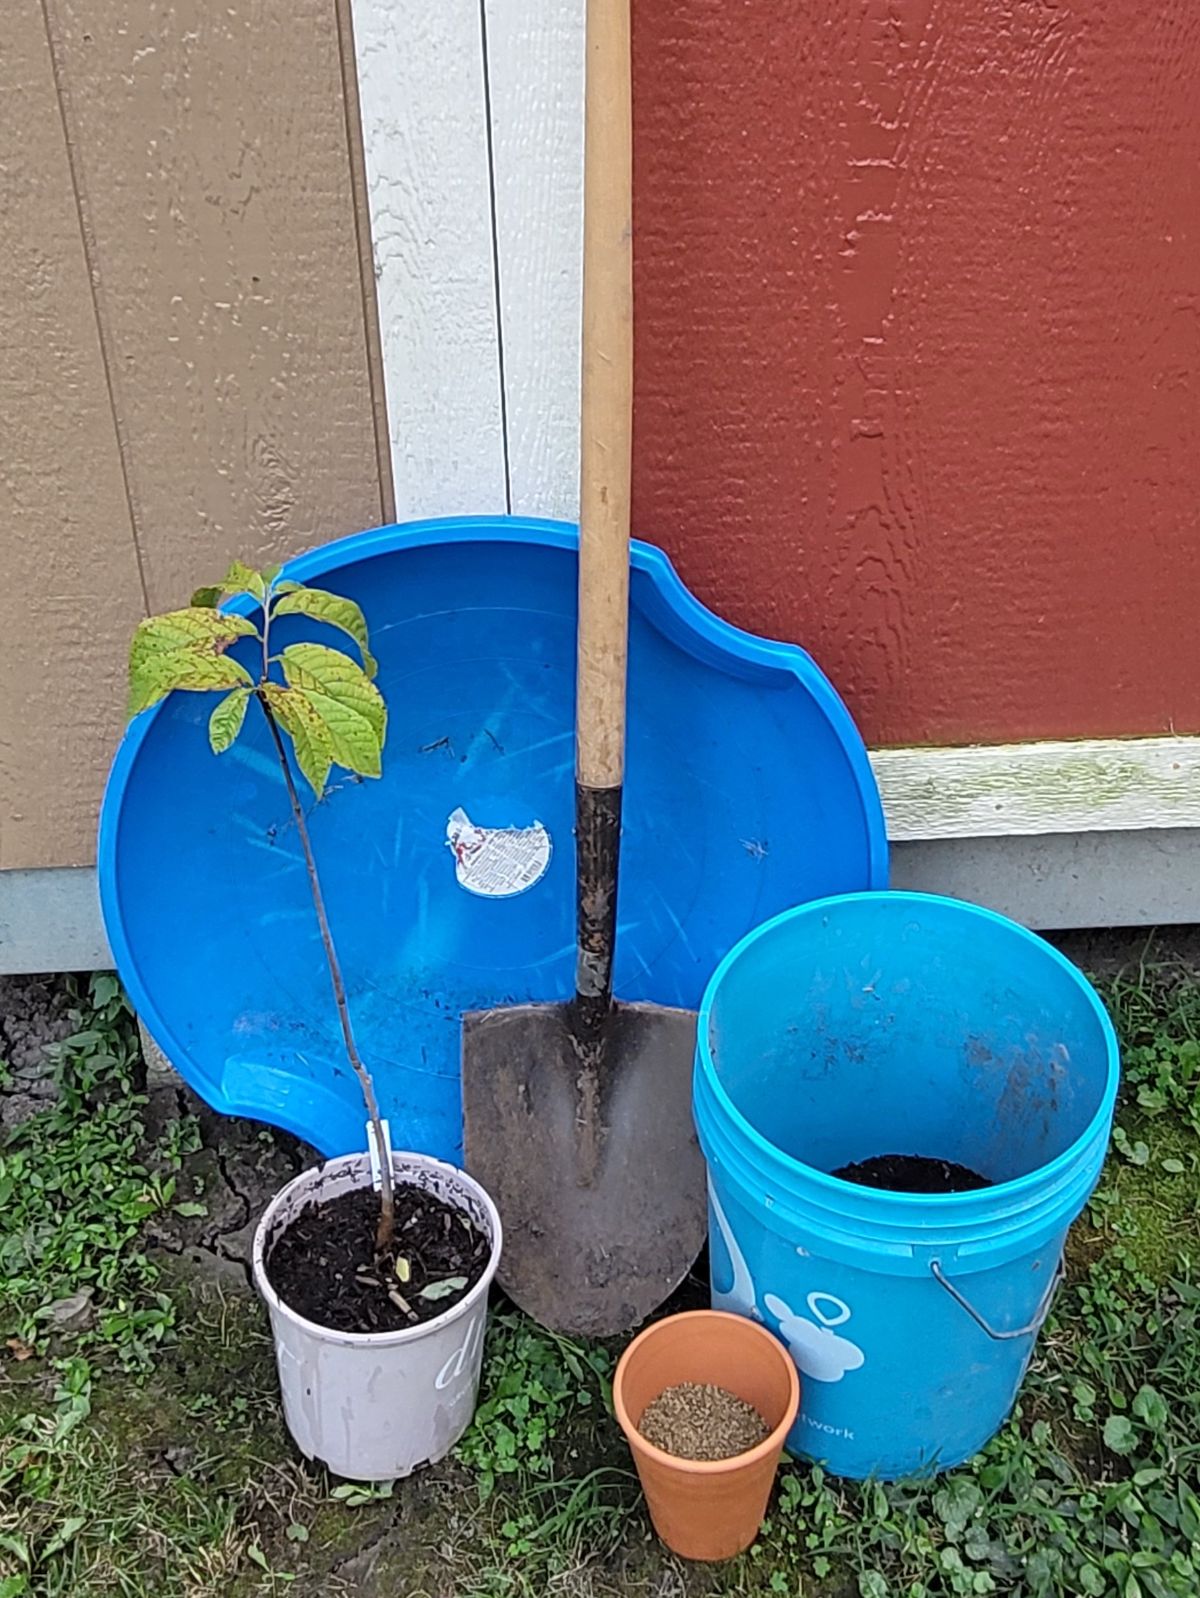 Equipment for planting a tree 